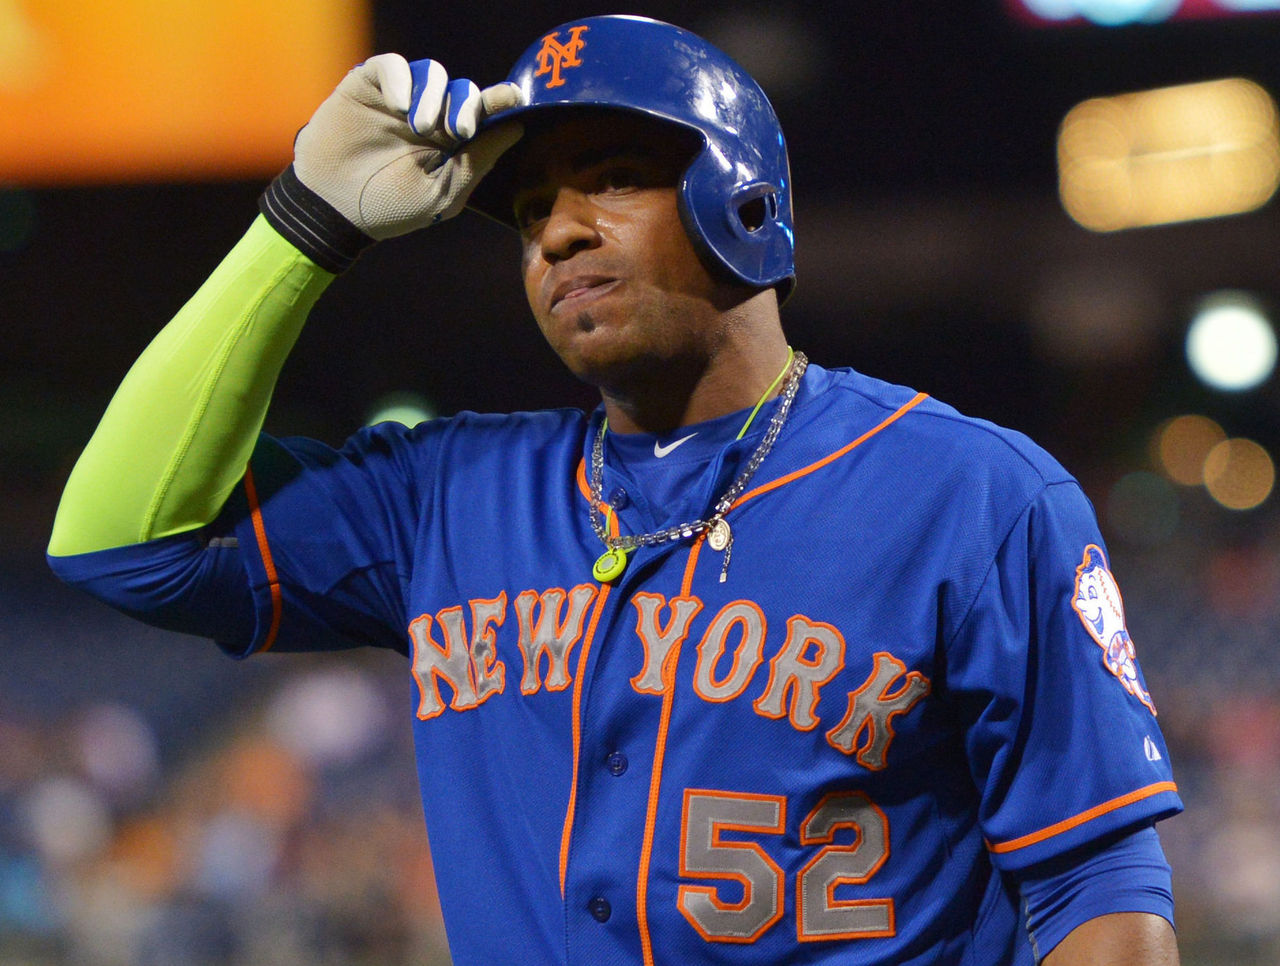 Yoenis Cespedes: Oakland A's Reportedly Sign Cuban Outfielder to 4